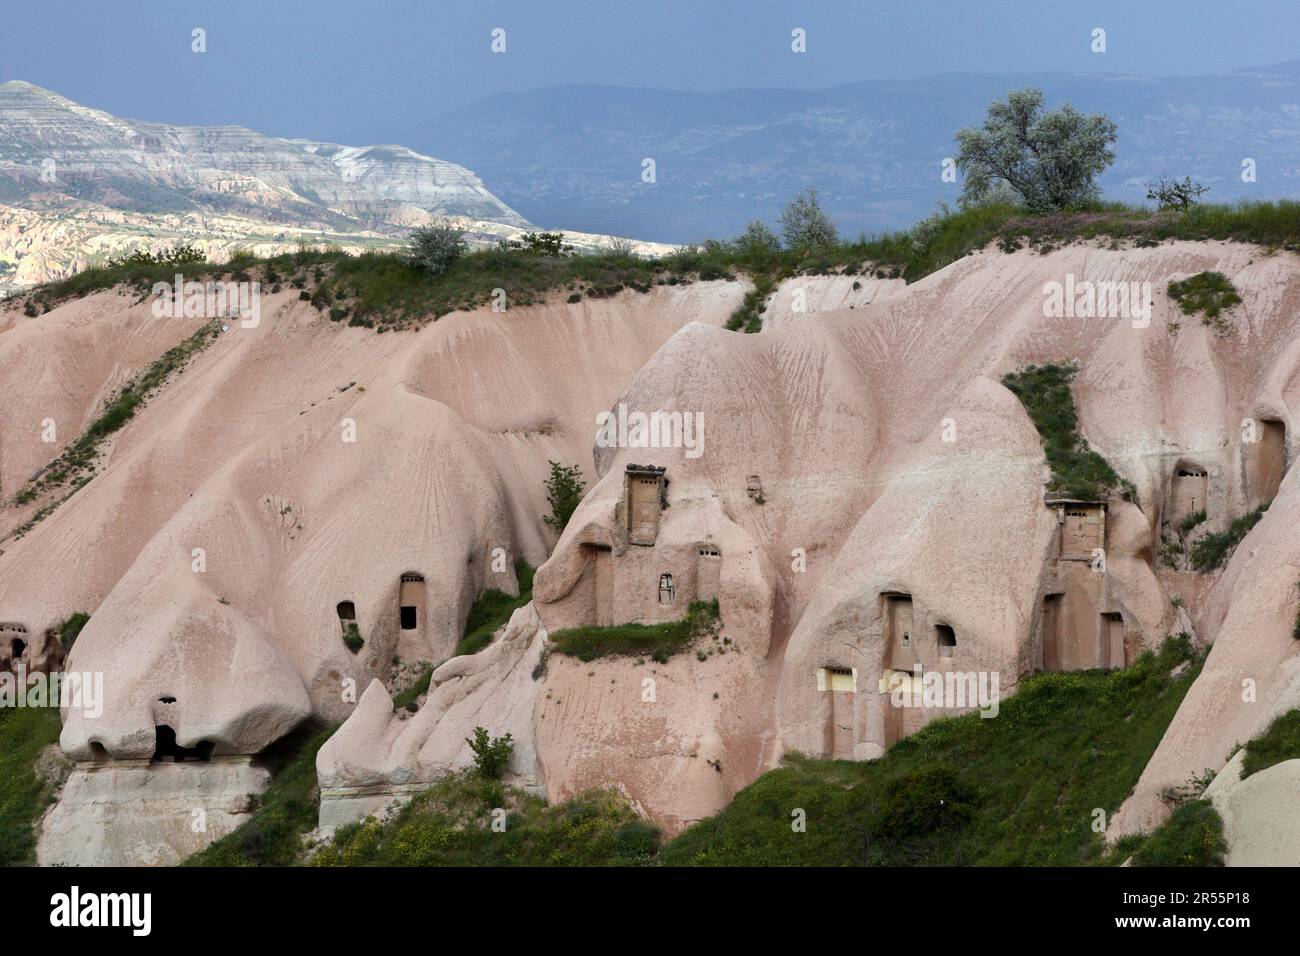 Former cave homes sit on a cliff face in Pigeon Valley at Uchisar in the Cappadocia region of Turkey. This region of Turkiye has a unique volcanic lan Stock Photo